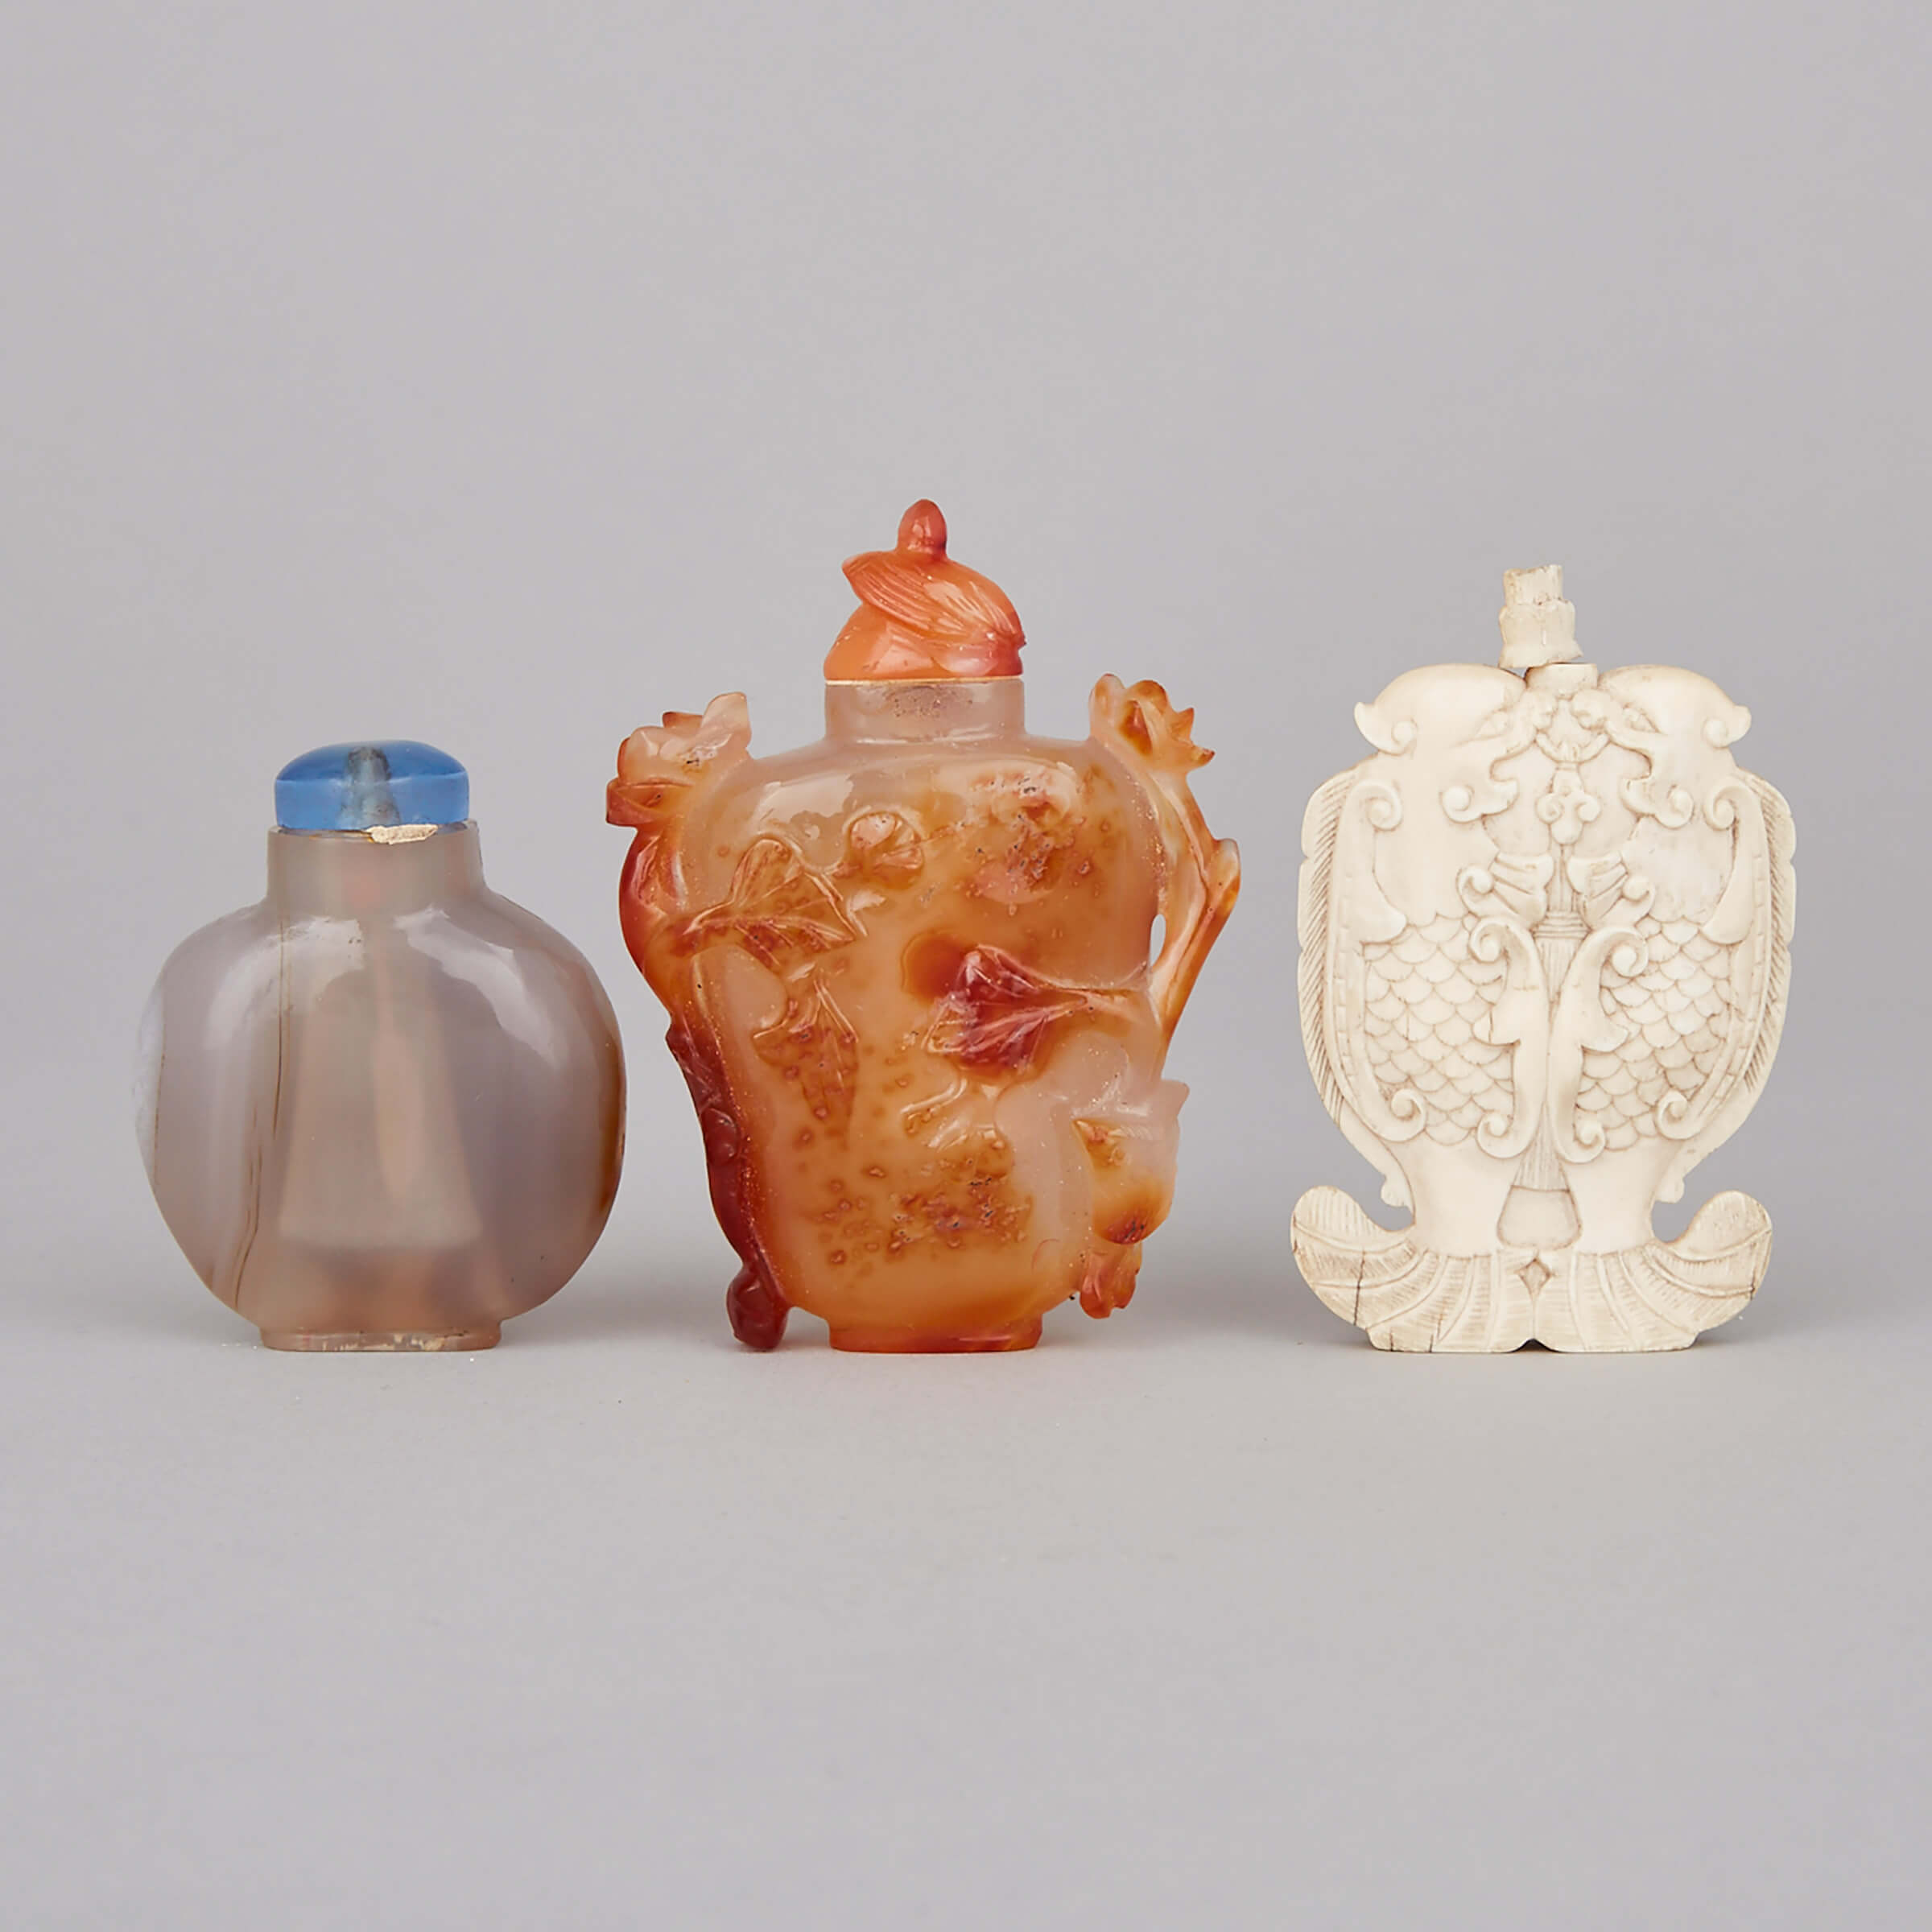 A Group of Three Snuff Bottles, Late 19th/Early 20th Century